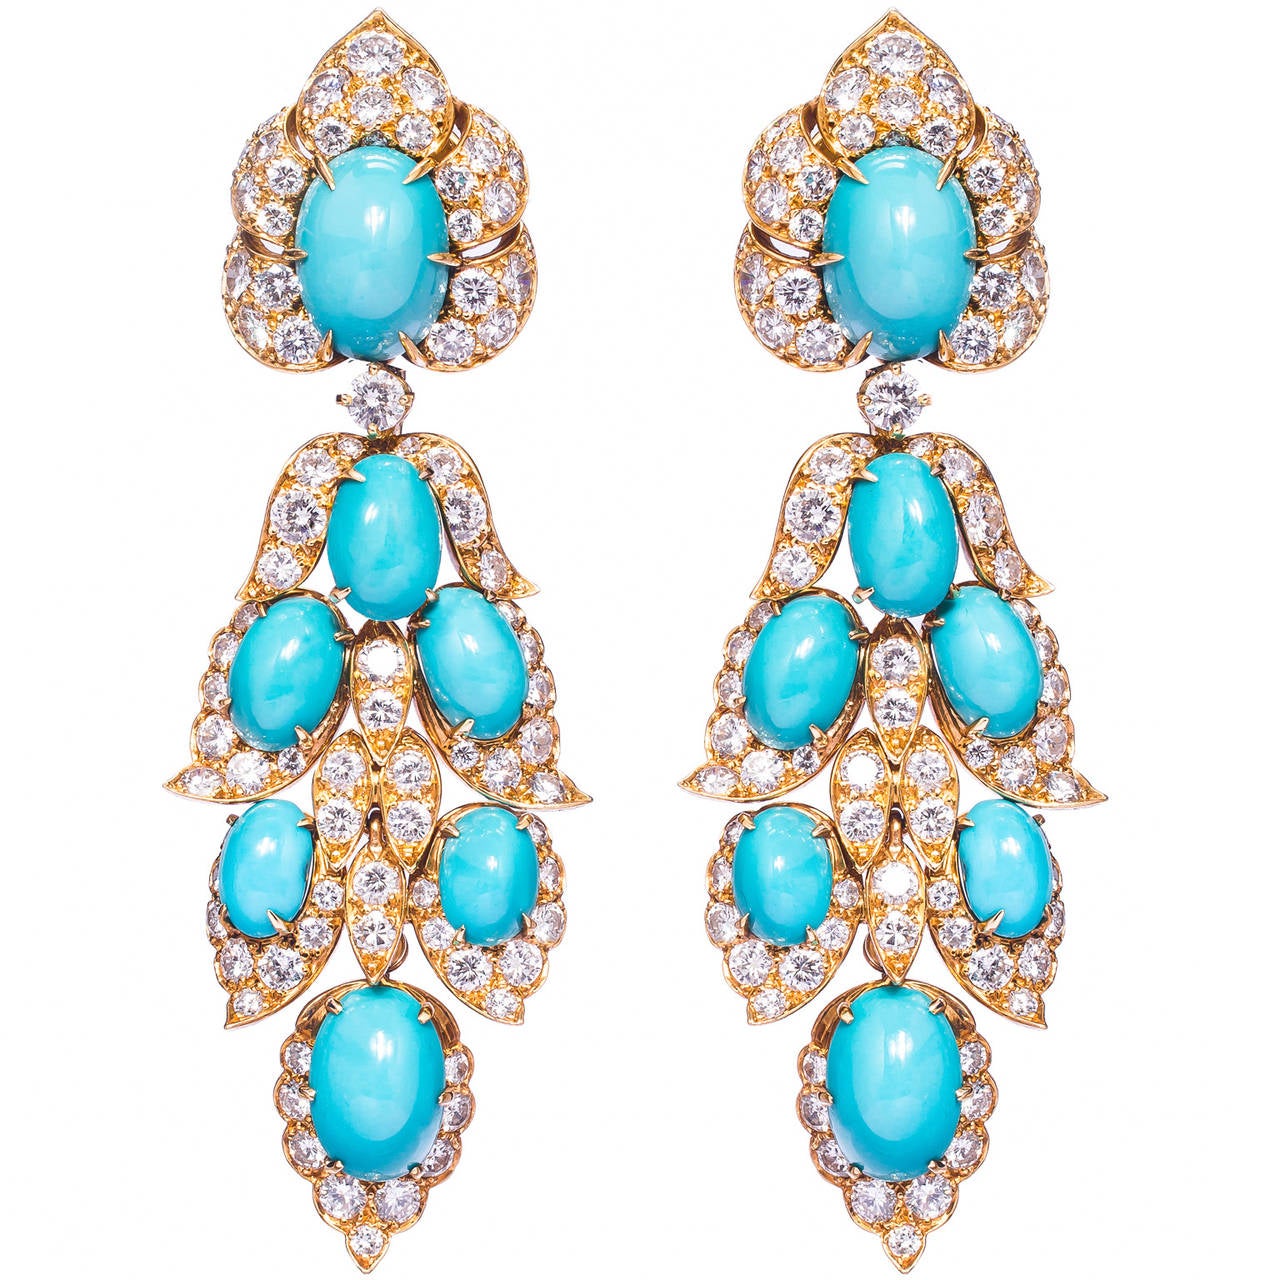 Magnificent 1960s Van Cleef & Arpels Turquoise Diamond Gold Earrings For Sale